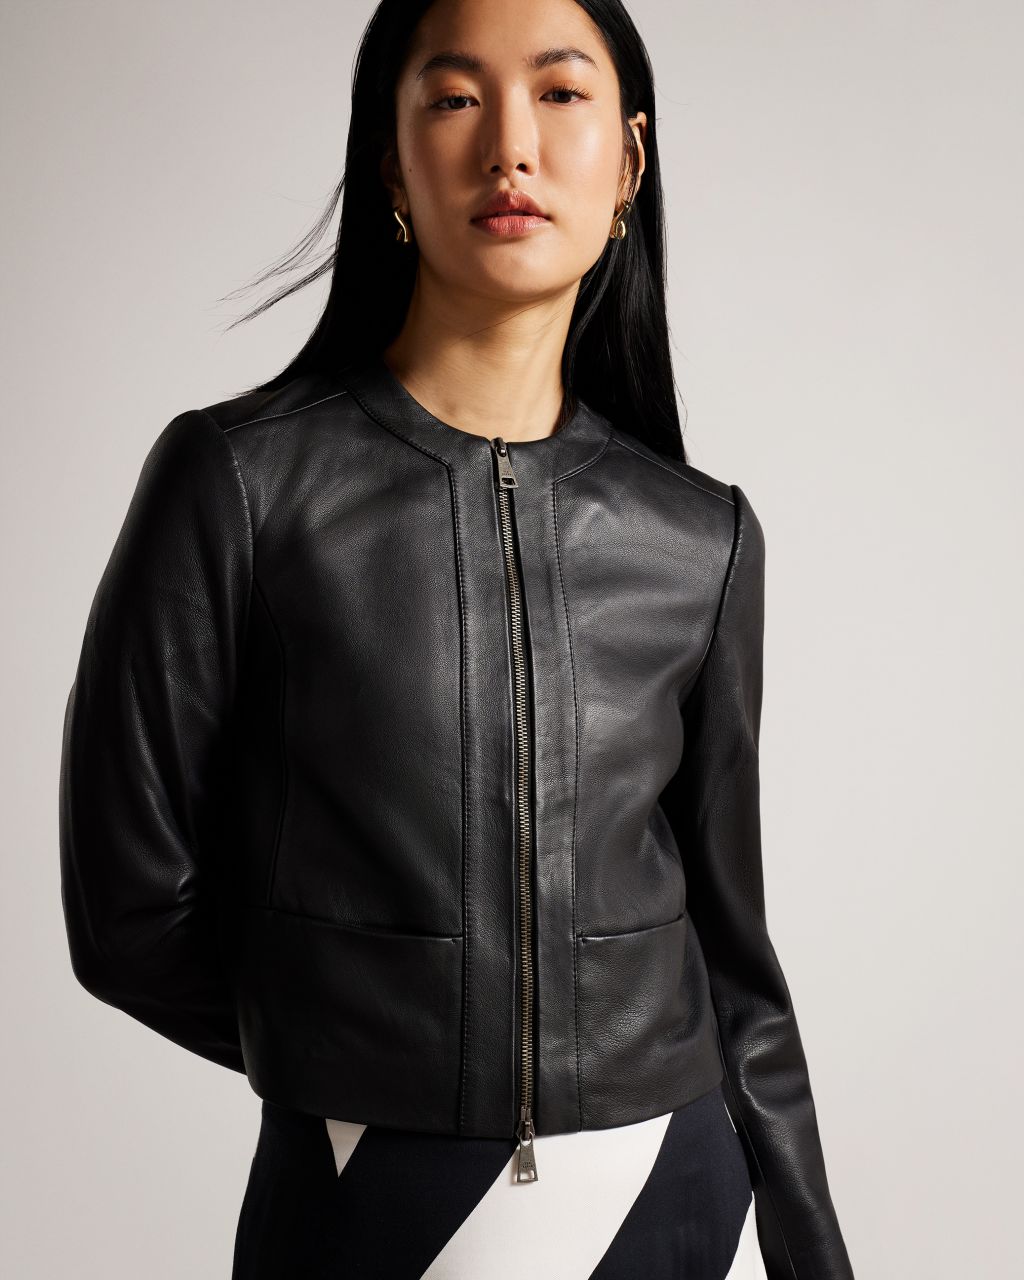 Ted Baker Women's Fitted Panelled Leather Jacket in Black, Clarya